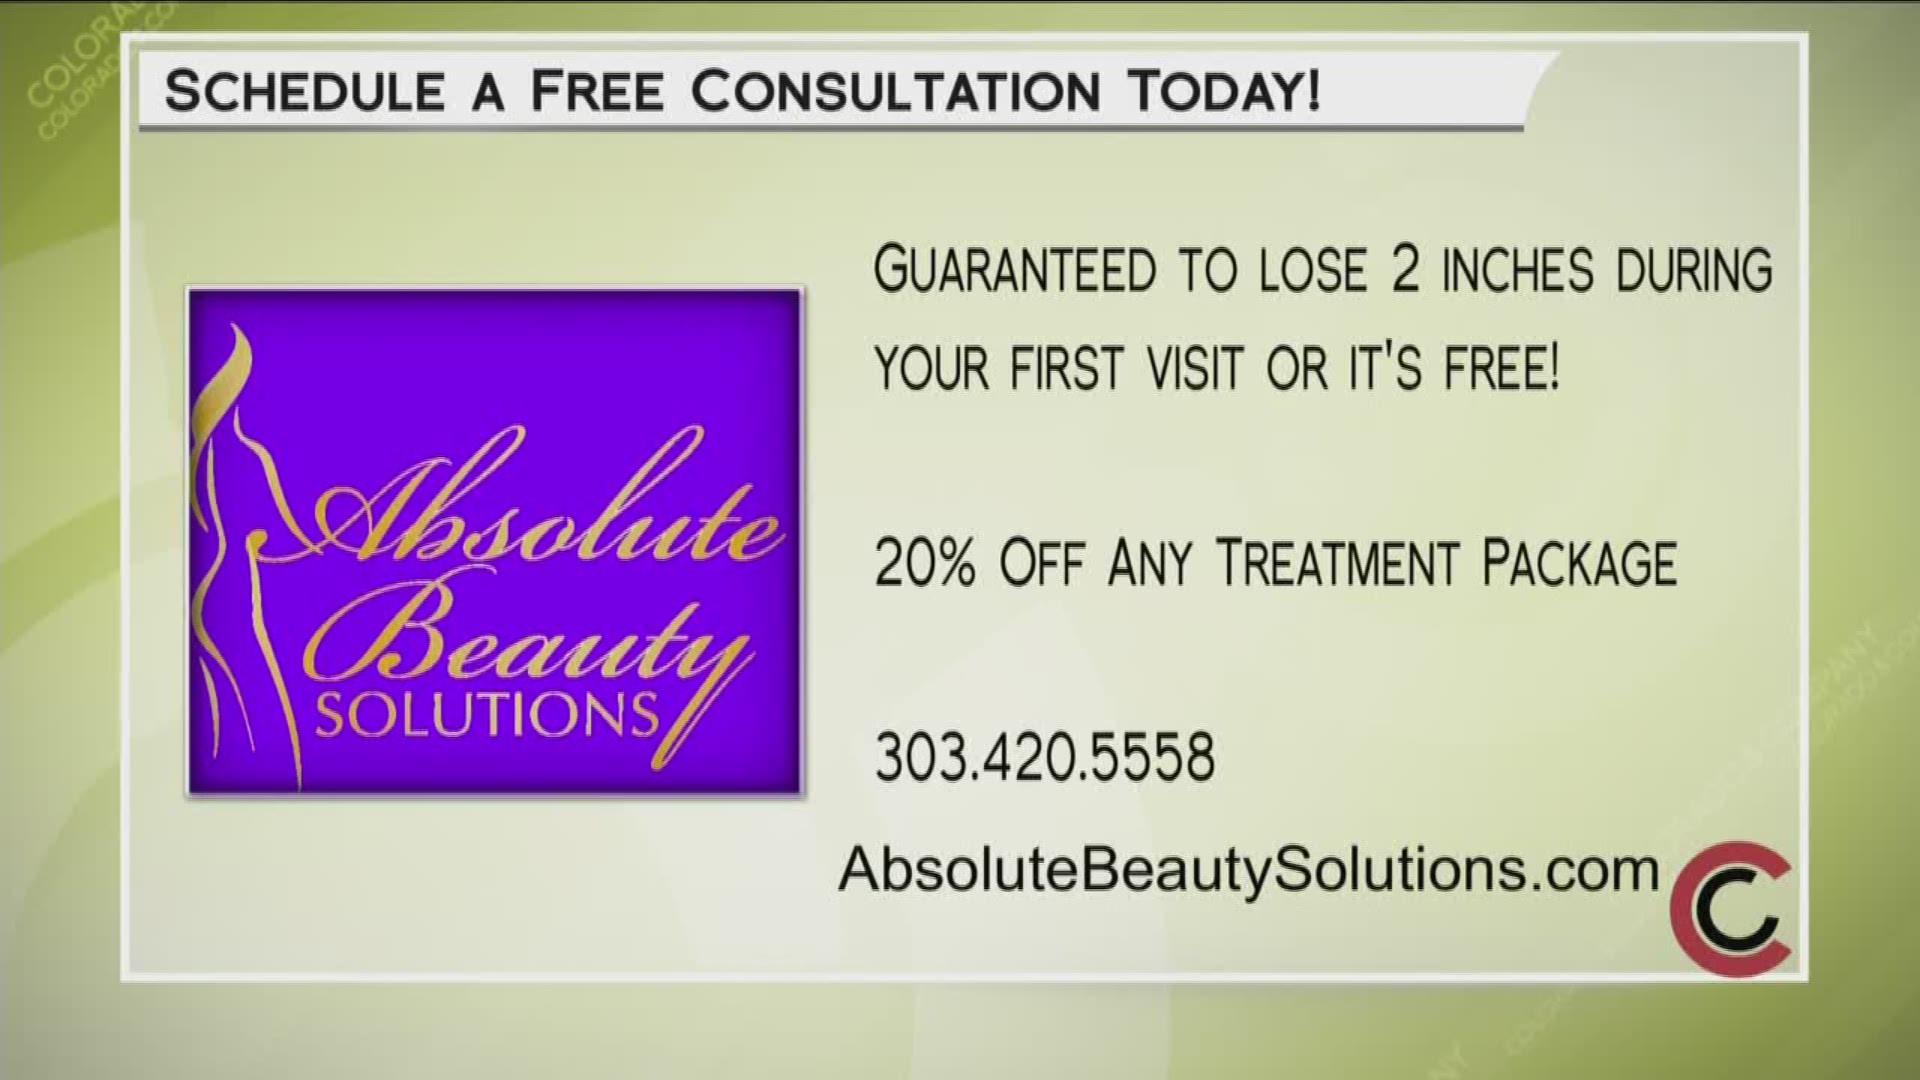 Try Ultra Slim or any of the other non-invasive treatments offered at Absolute Beauty Solutions. Learn more at AbsoluteBeautySolutions.com or call 303.420.5558.